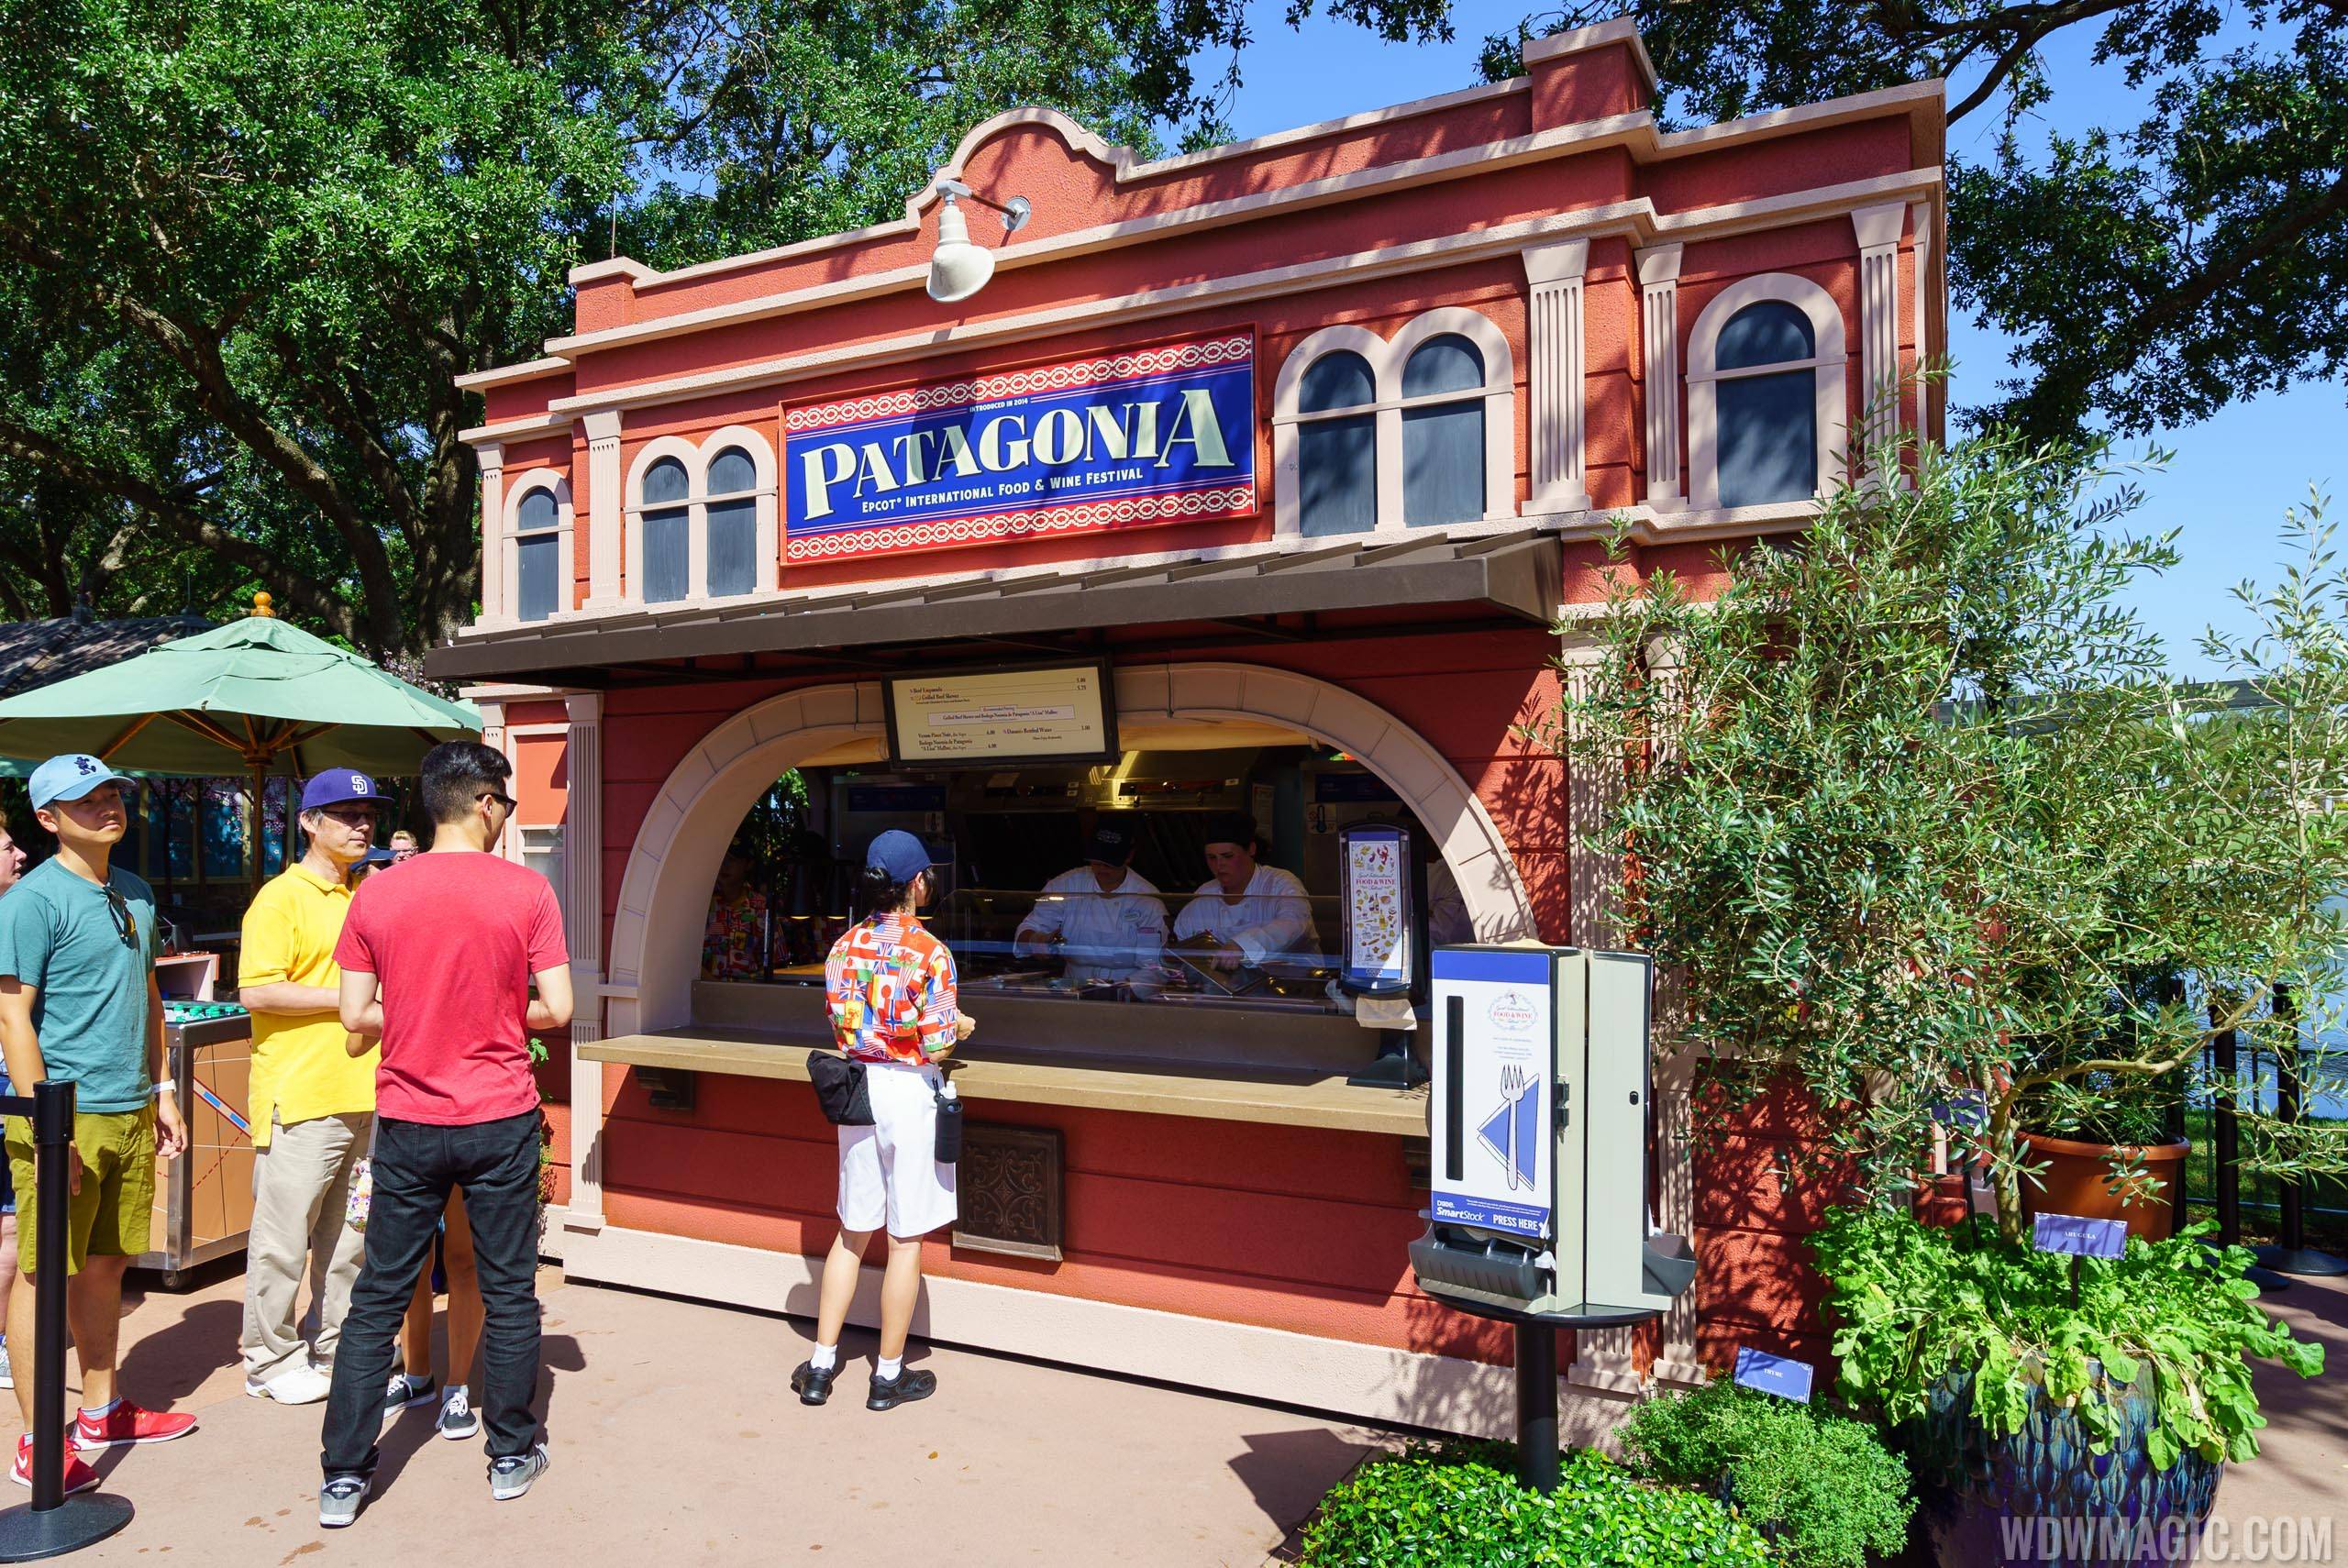 2017 Epcot Food and Wine Festival - Patagonia marketplace kiosk